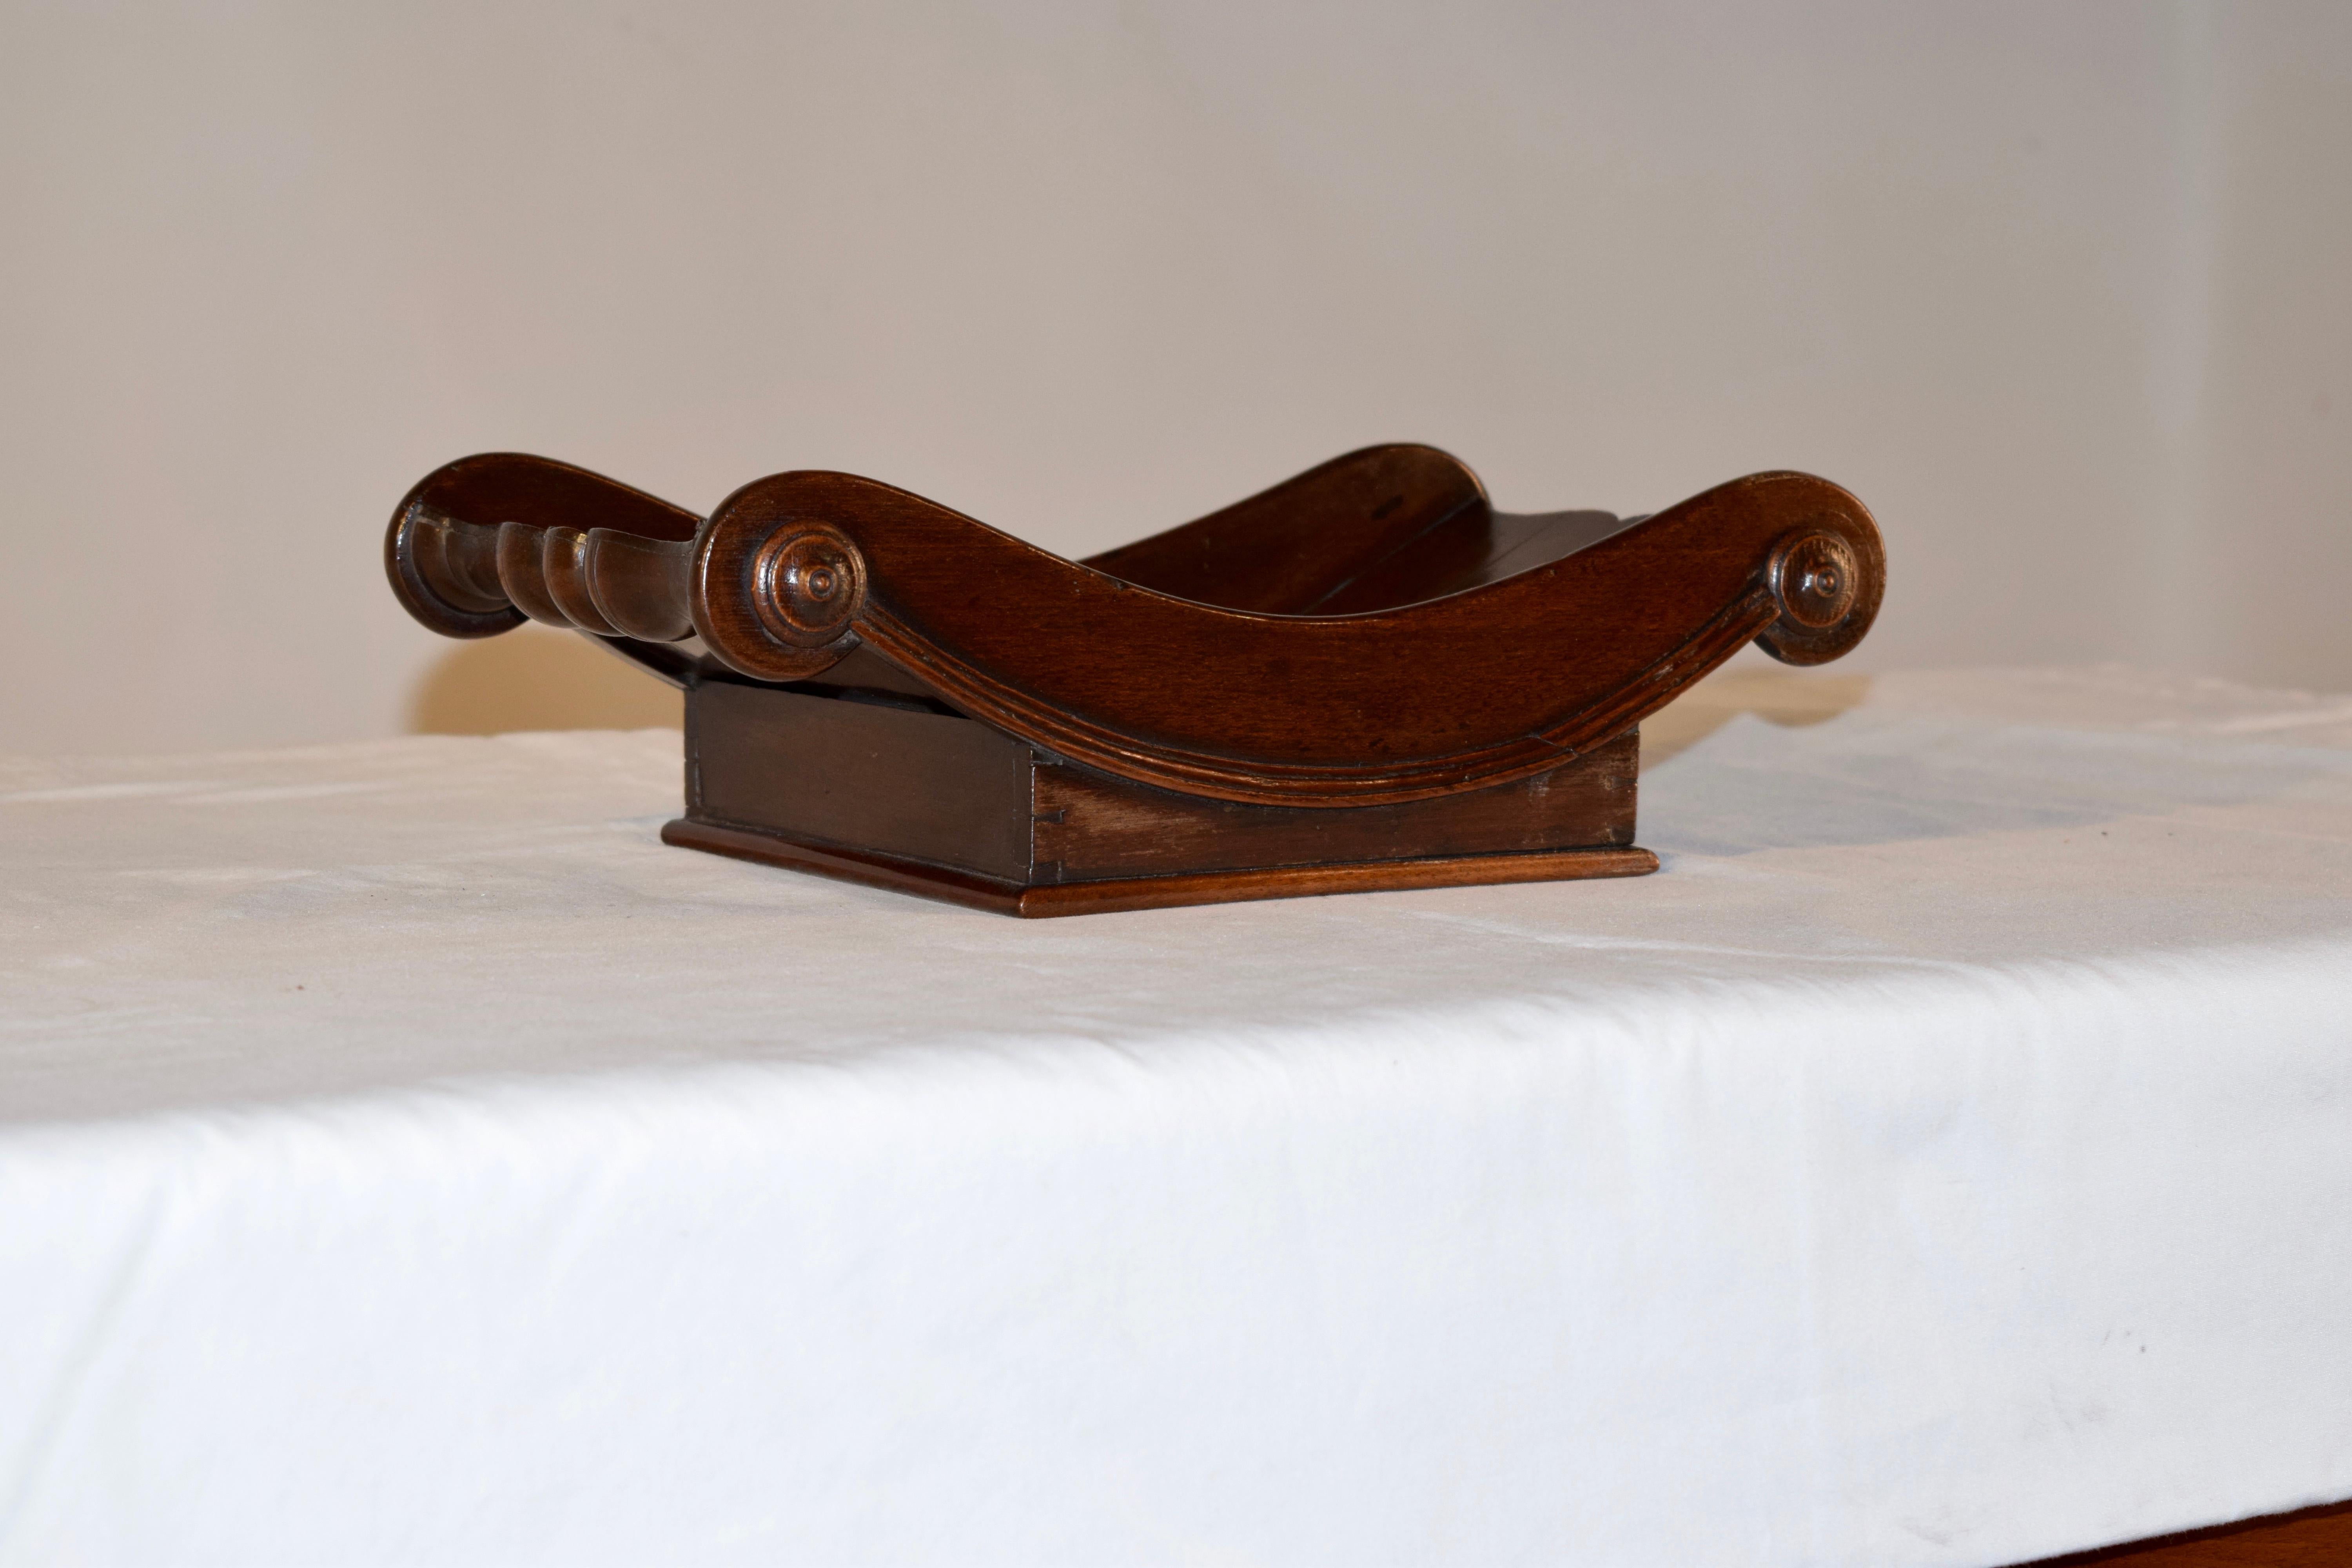 19th century mahogany cheese cradle from England with a sleigh shaped dish over a square base. The edges end gracefully in a scroll shape and molded edges.